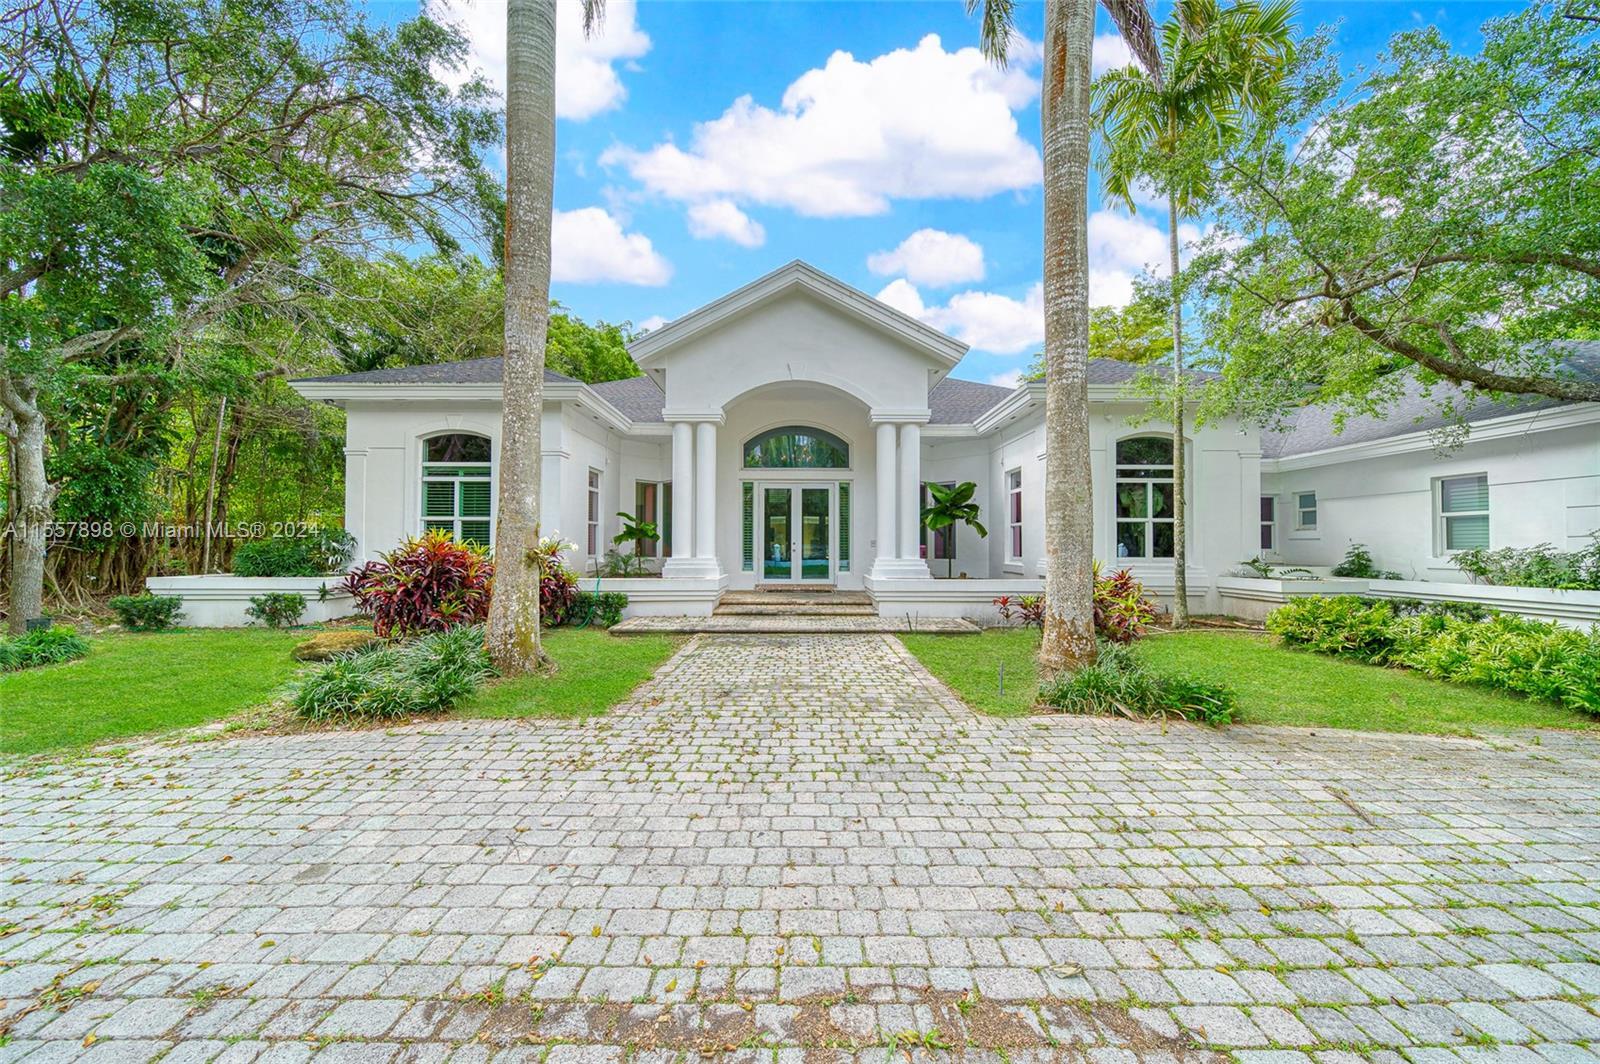 Beautiful 1-Story Executive home in the heart of North Pinecrest! This home features 7 Bedrooms 7.5 